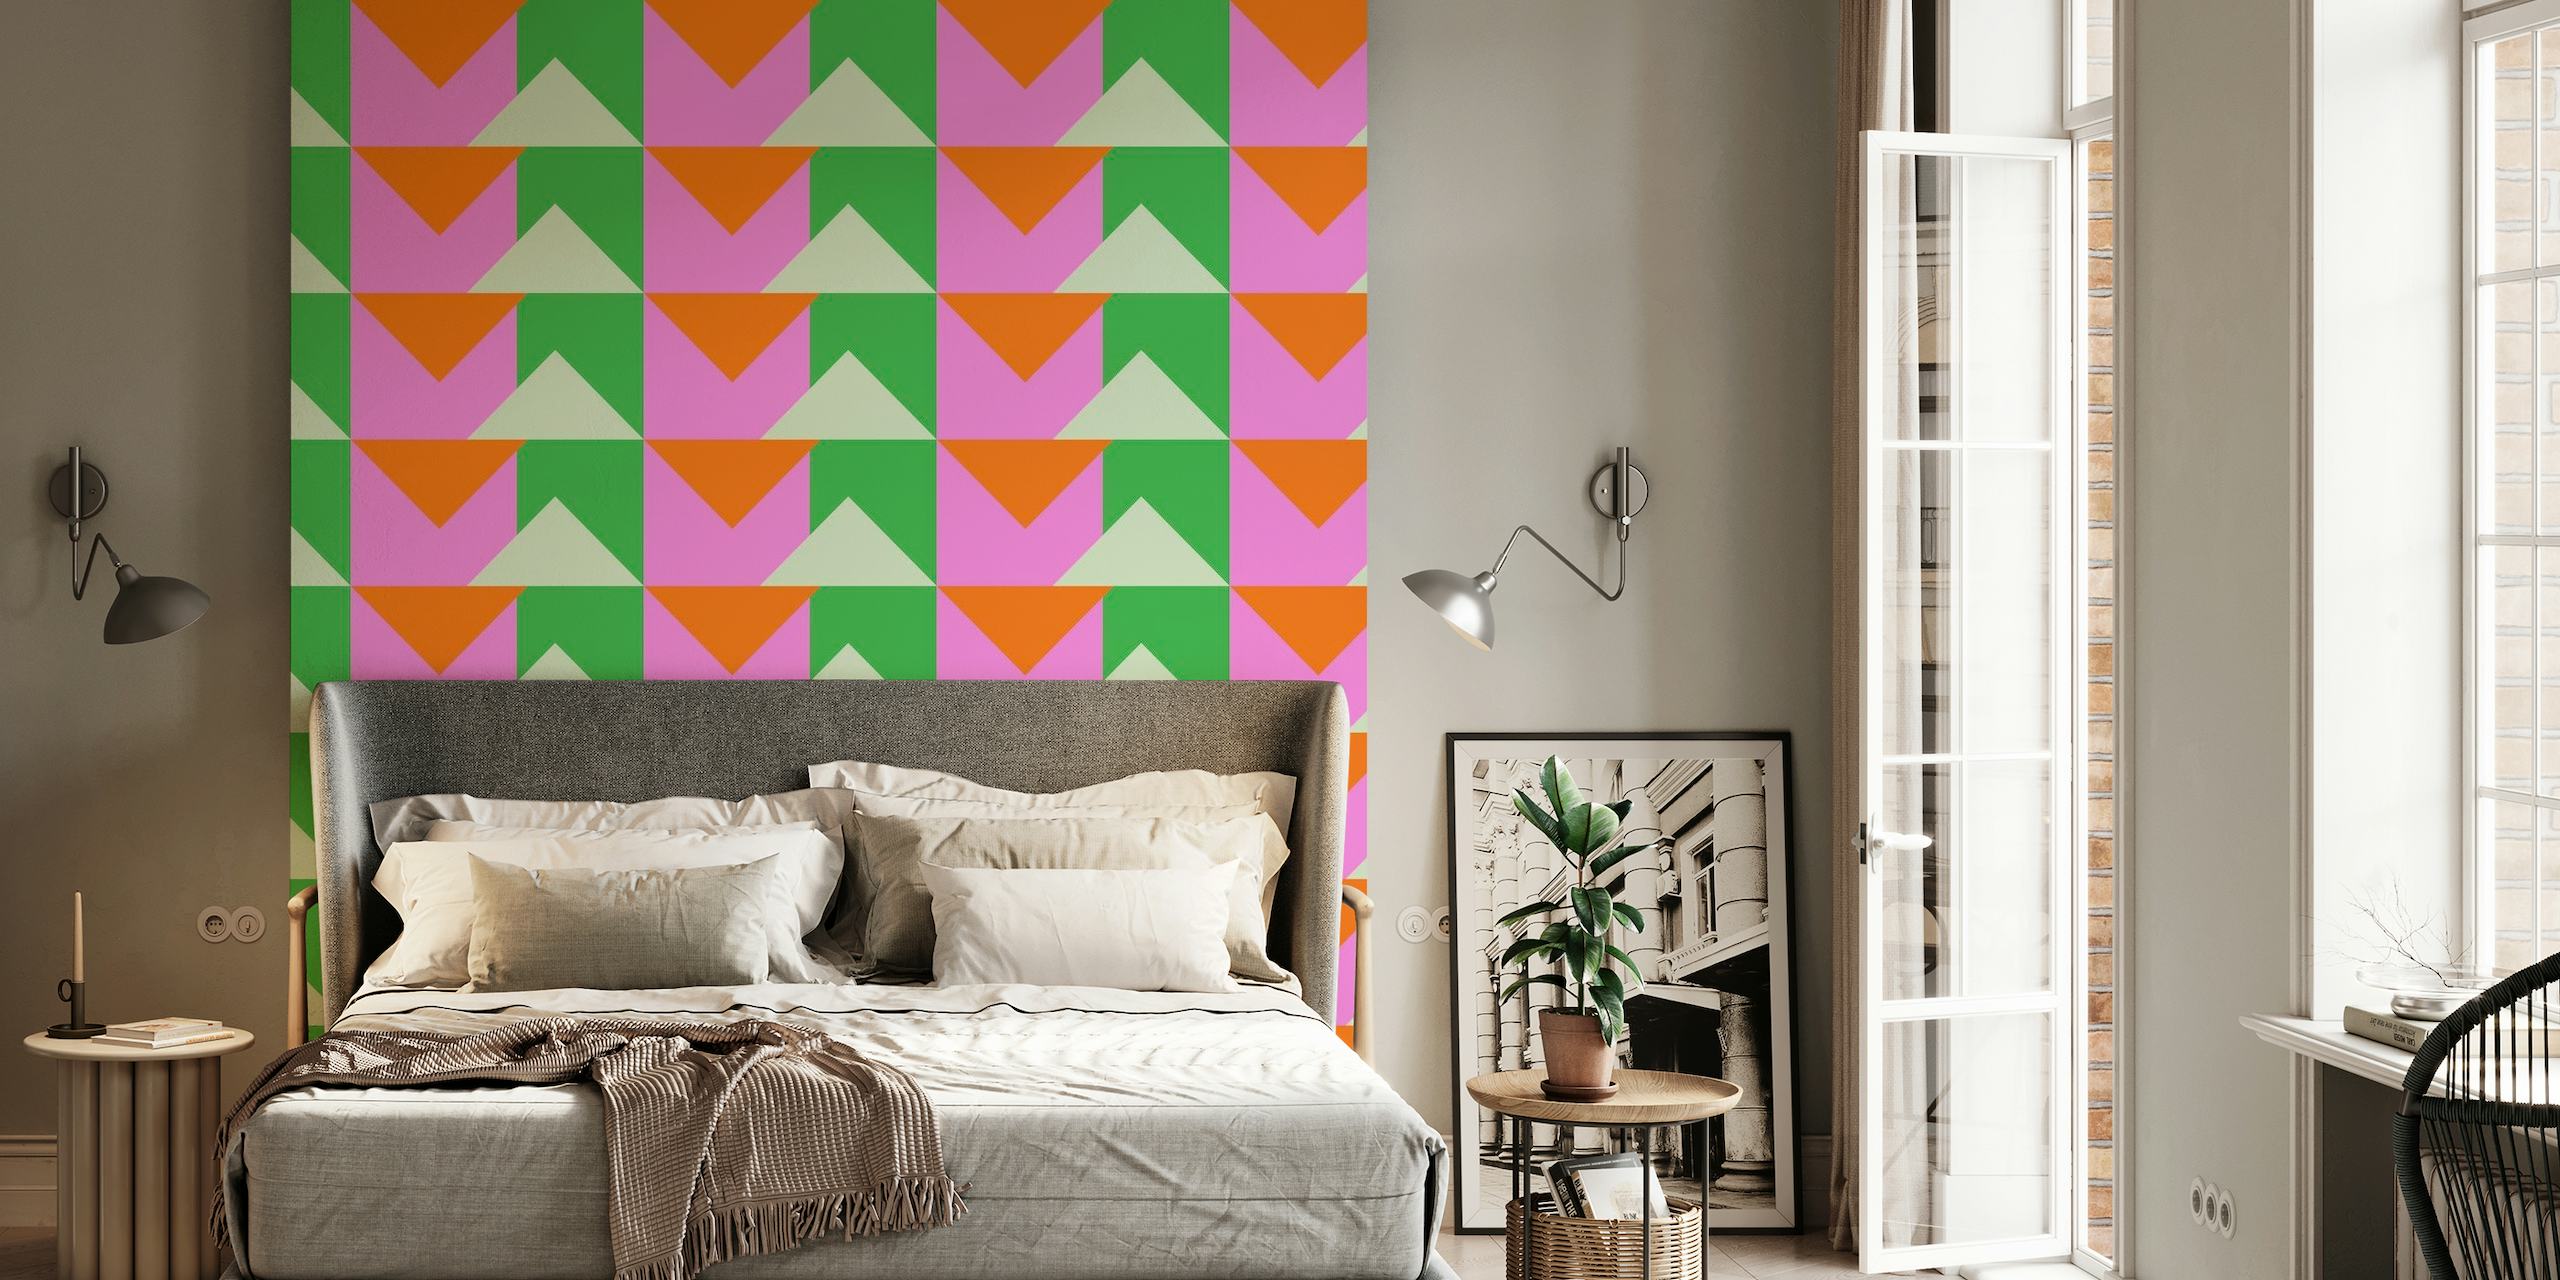 Pink and Green Triangles papel pintado